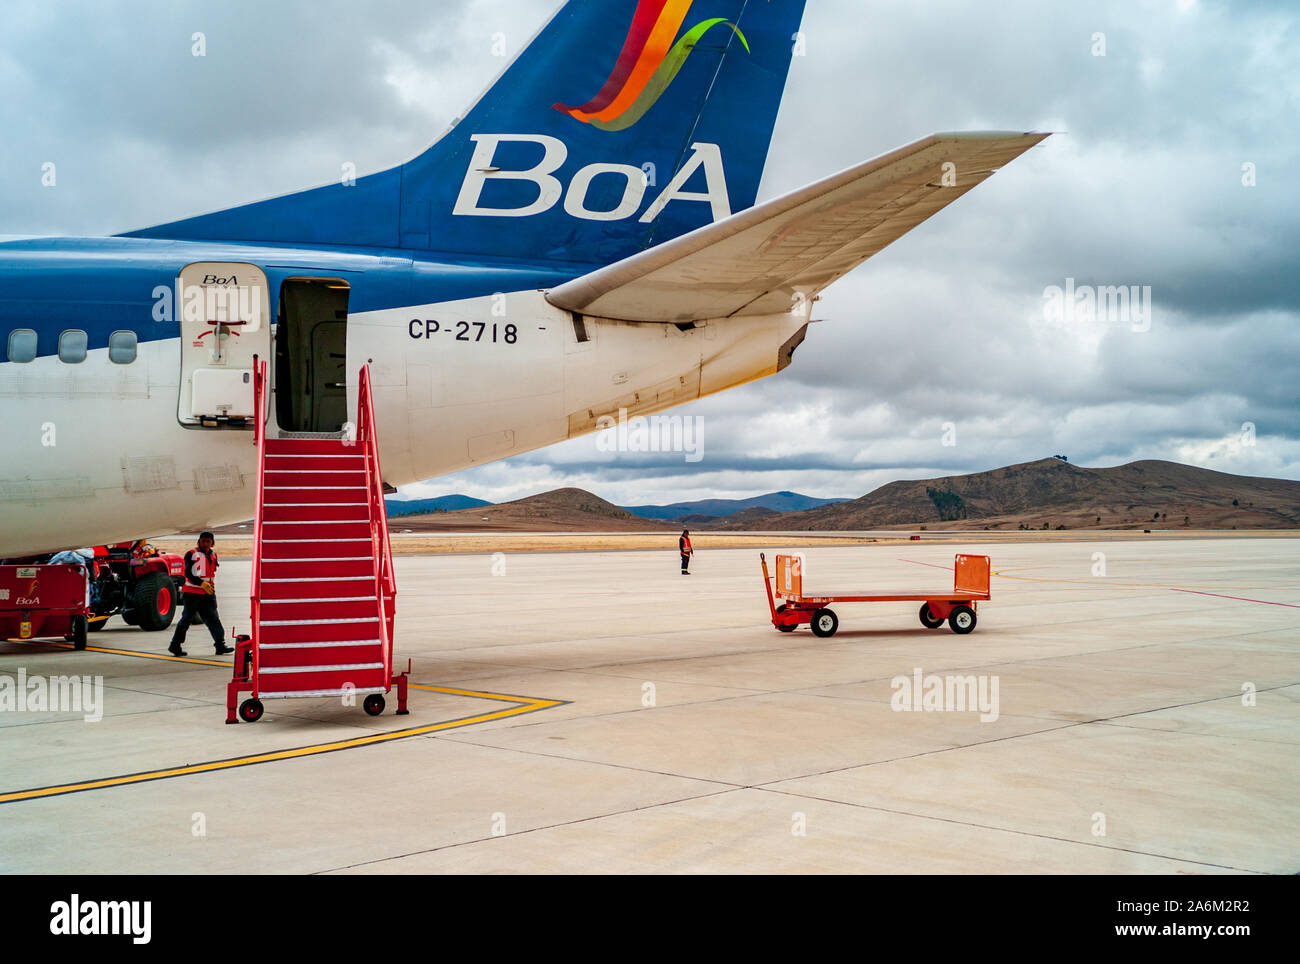 El Alto, La Paz / Bolivia; November 22 2016: Landing of a Boa Airplane in Airport with Staff Working Around Stock Photo